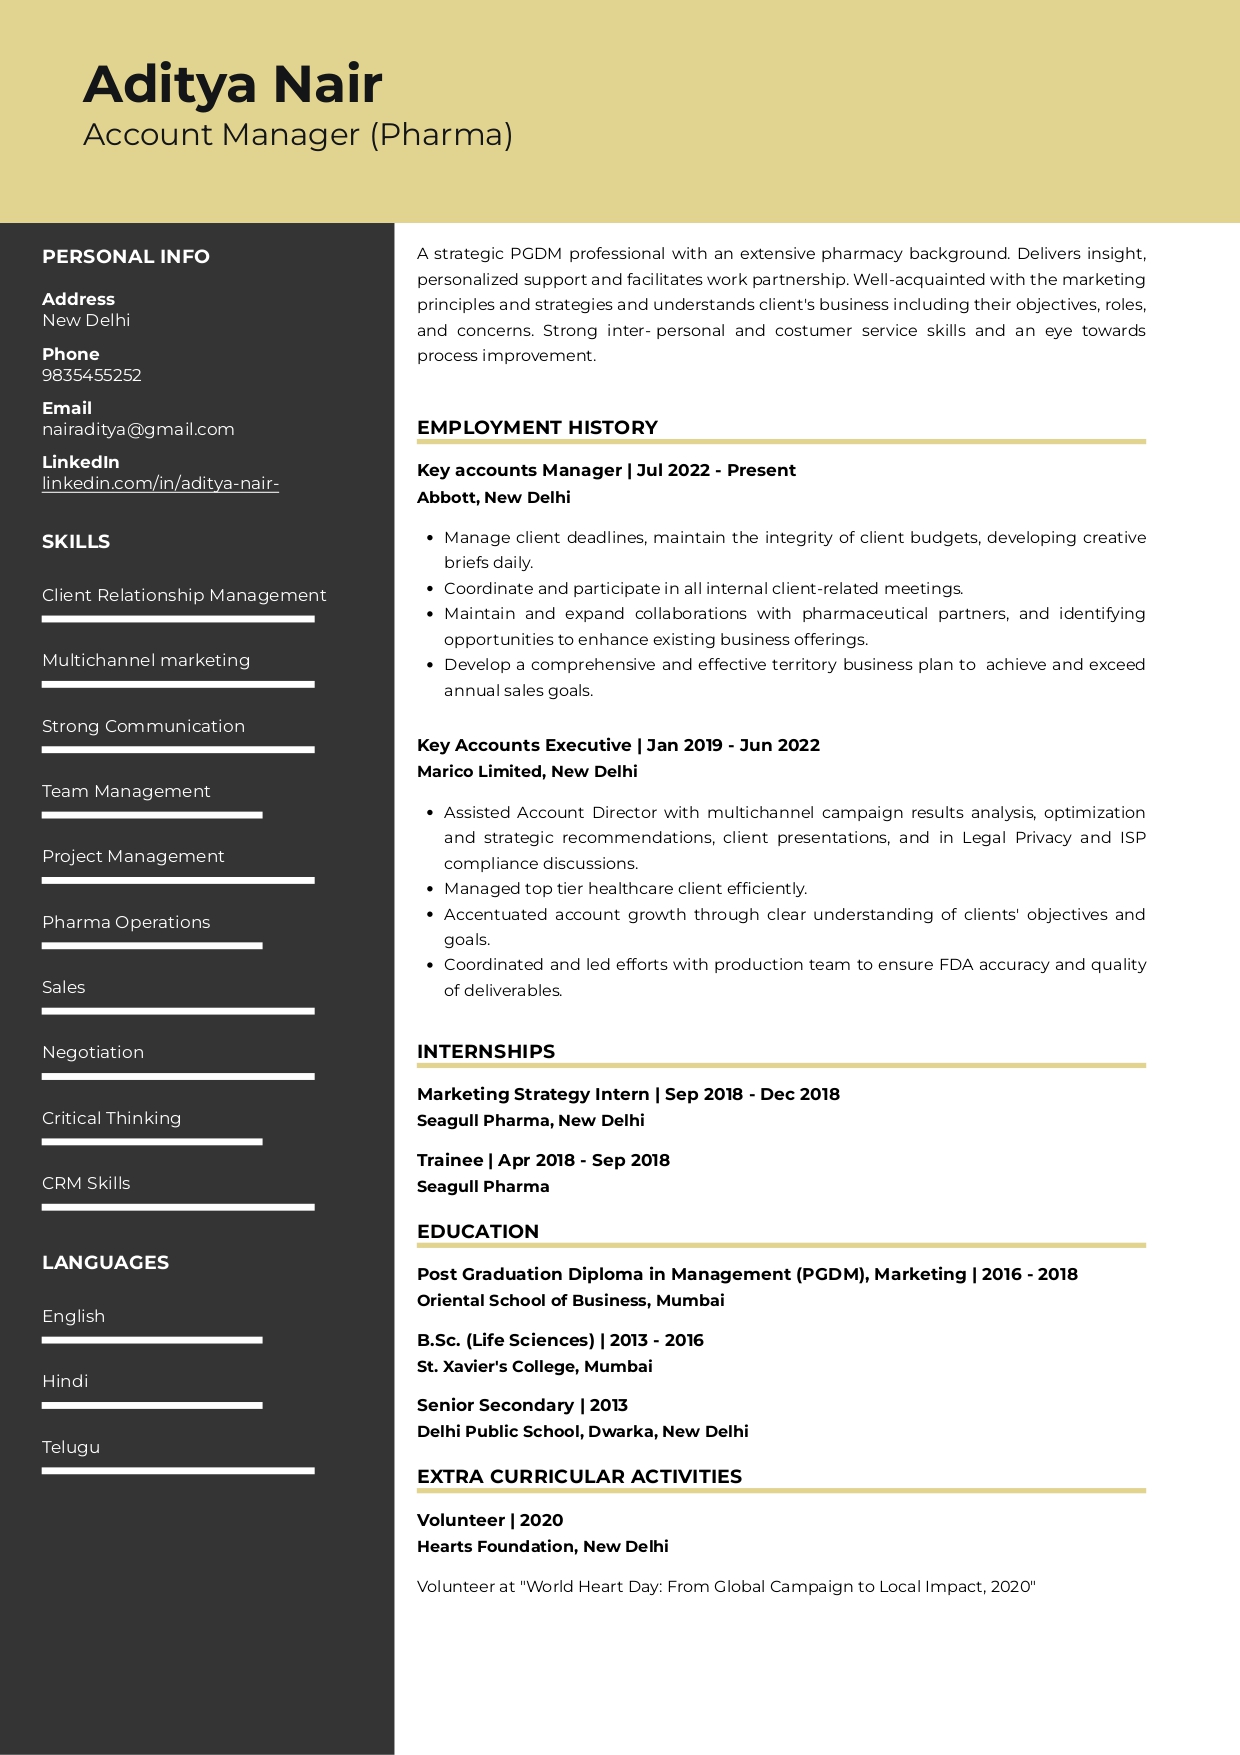 Resume of Account Manager- Pharma